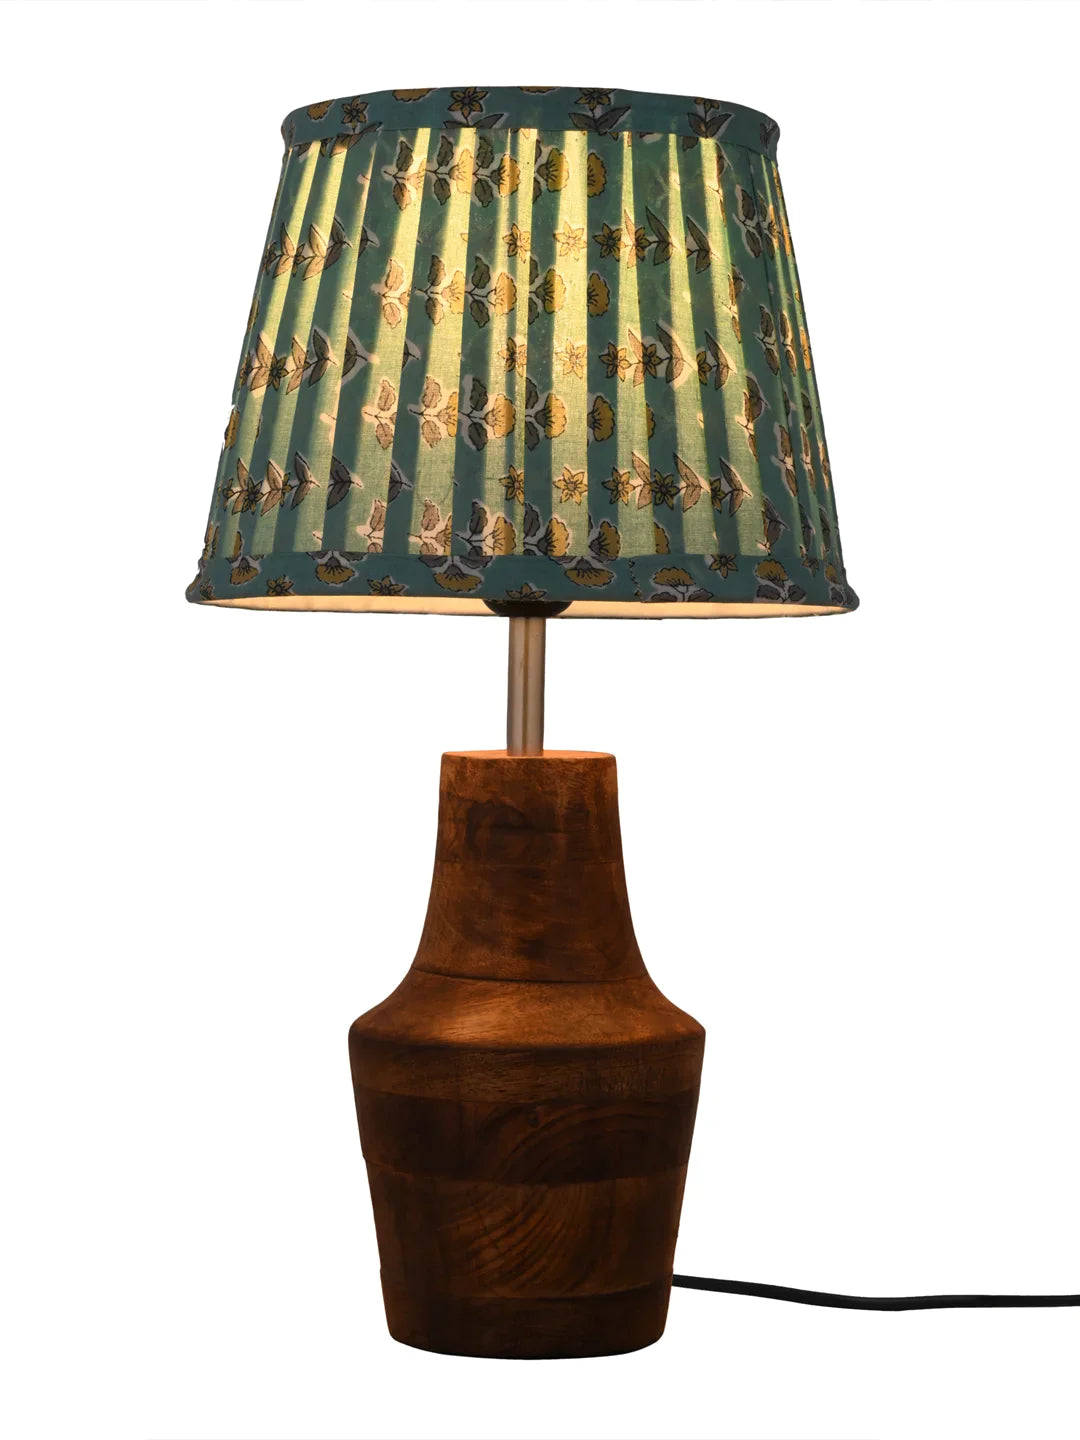 Wooden Firkin Table Lamp with Pleeted Colorful Turquoise Taper Shade